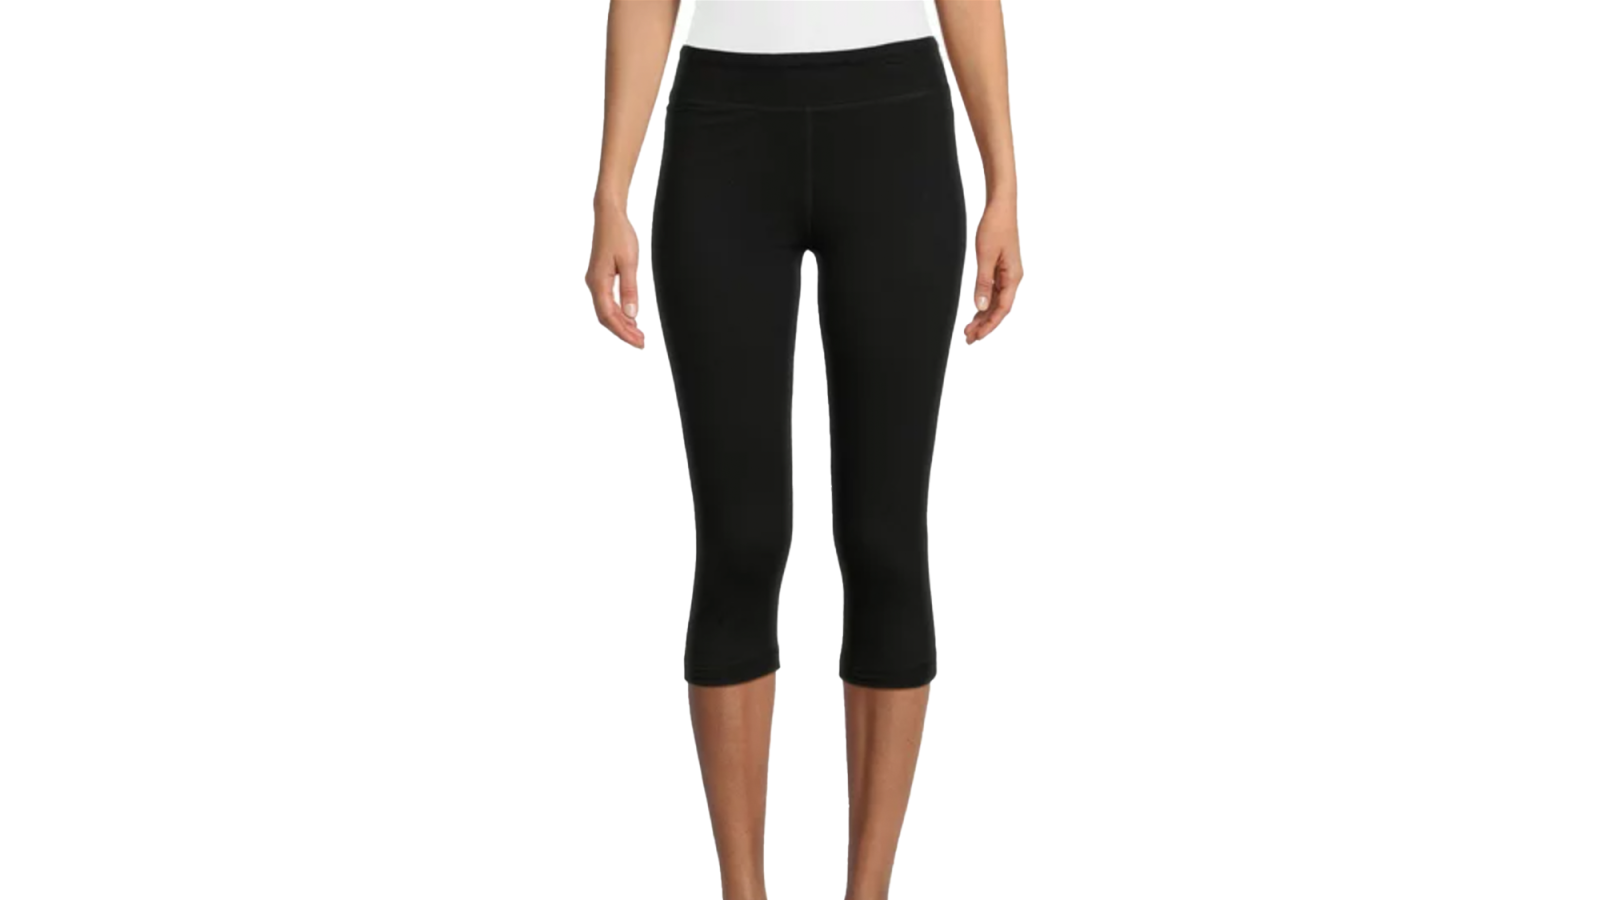 These 'Comfortable' Walmart Capri Leggings Are Only $10